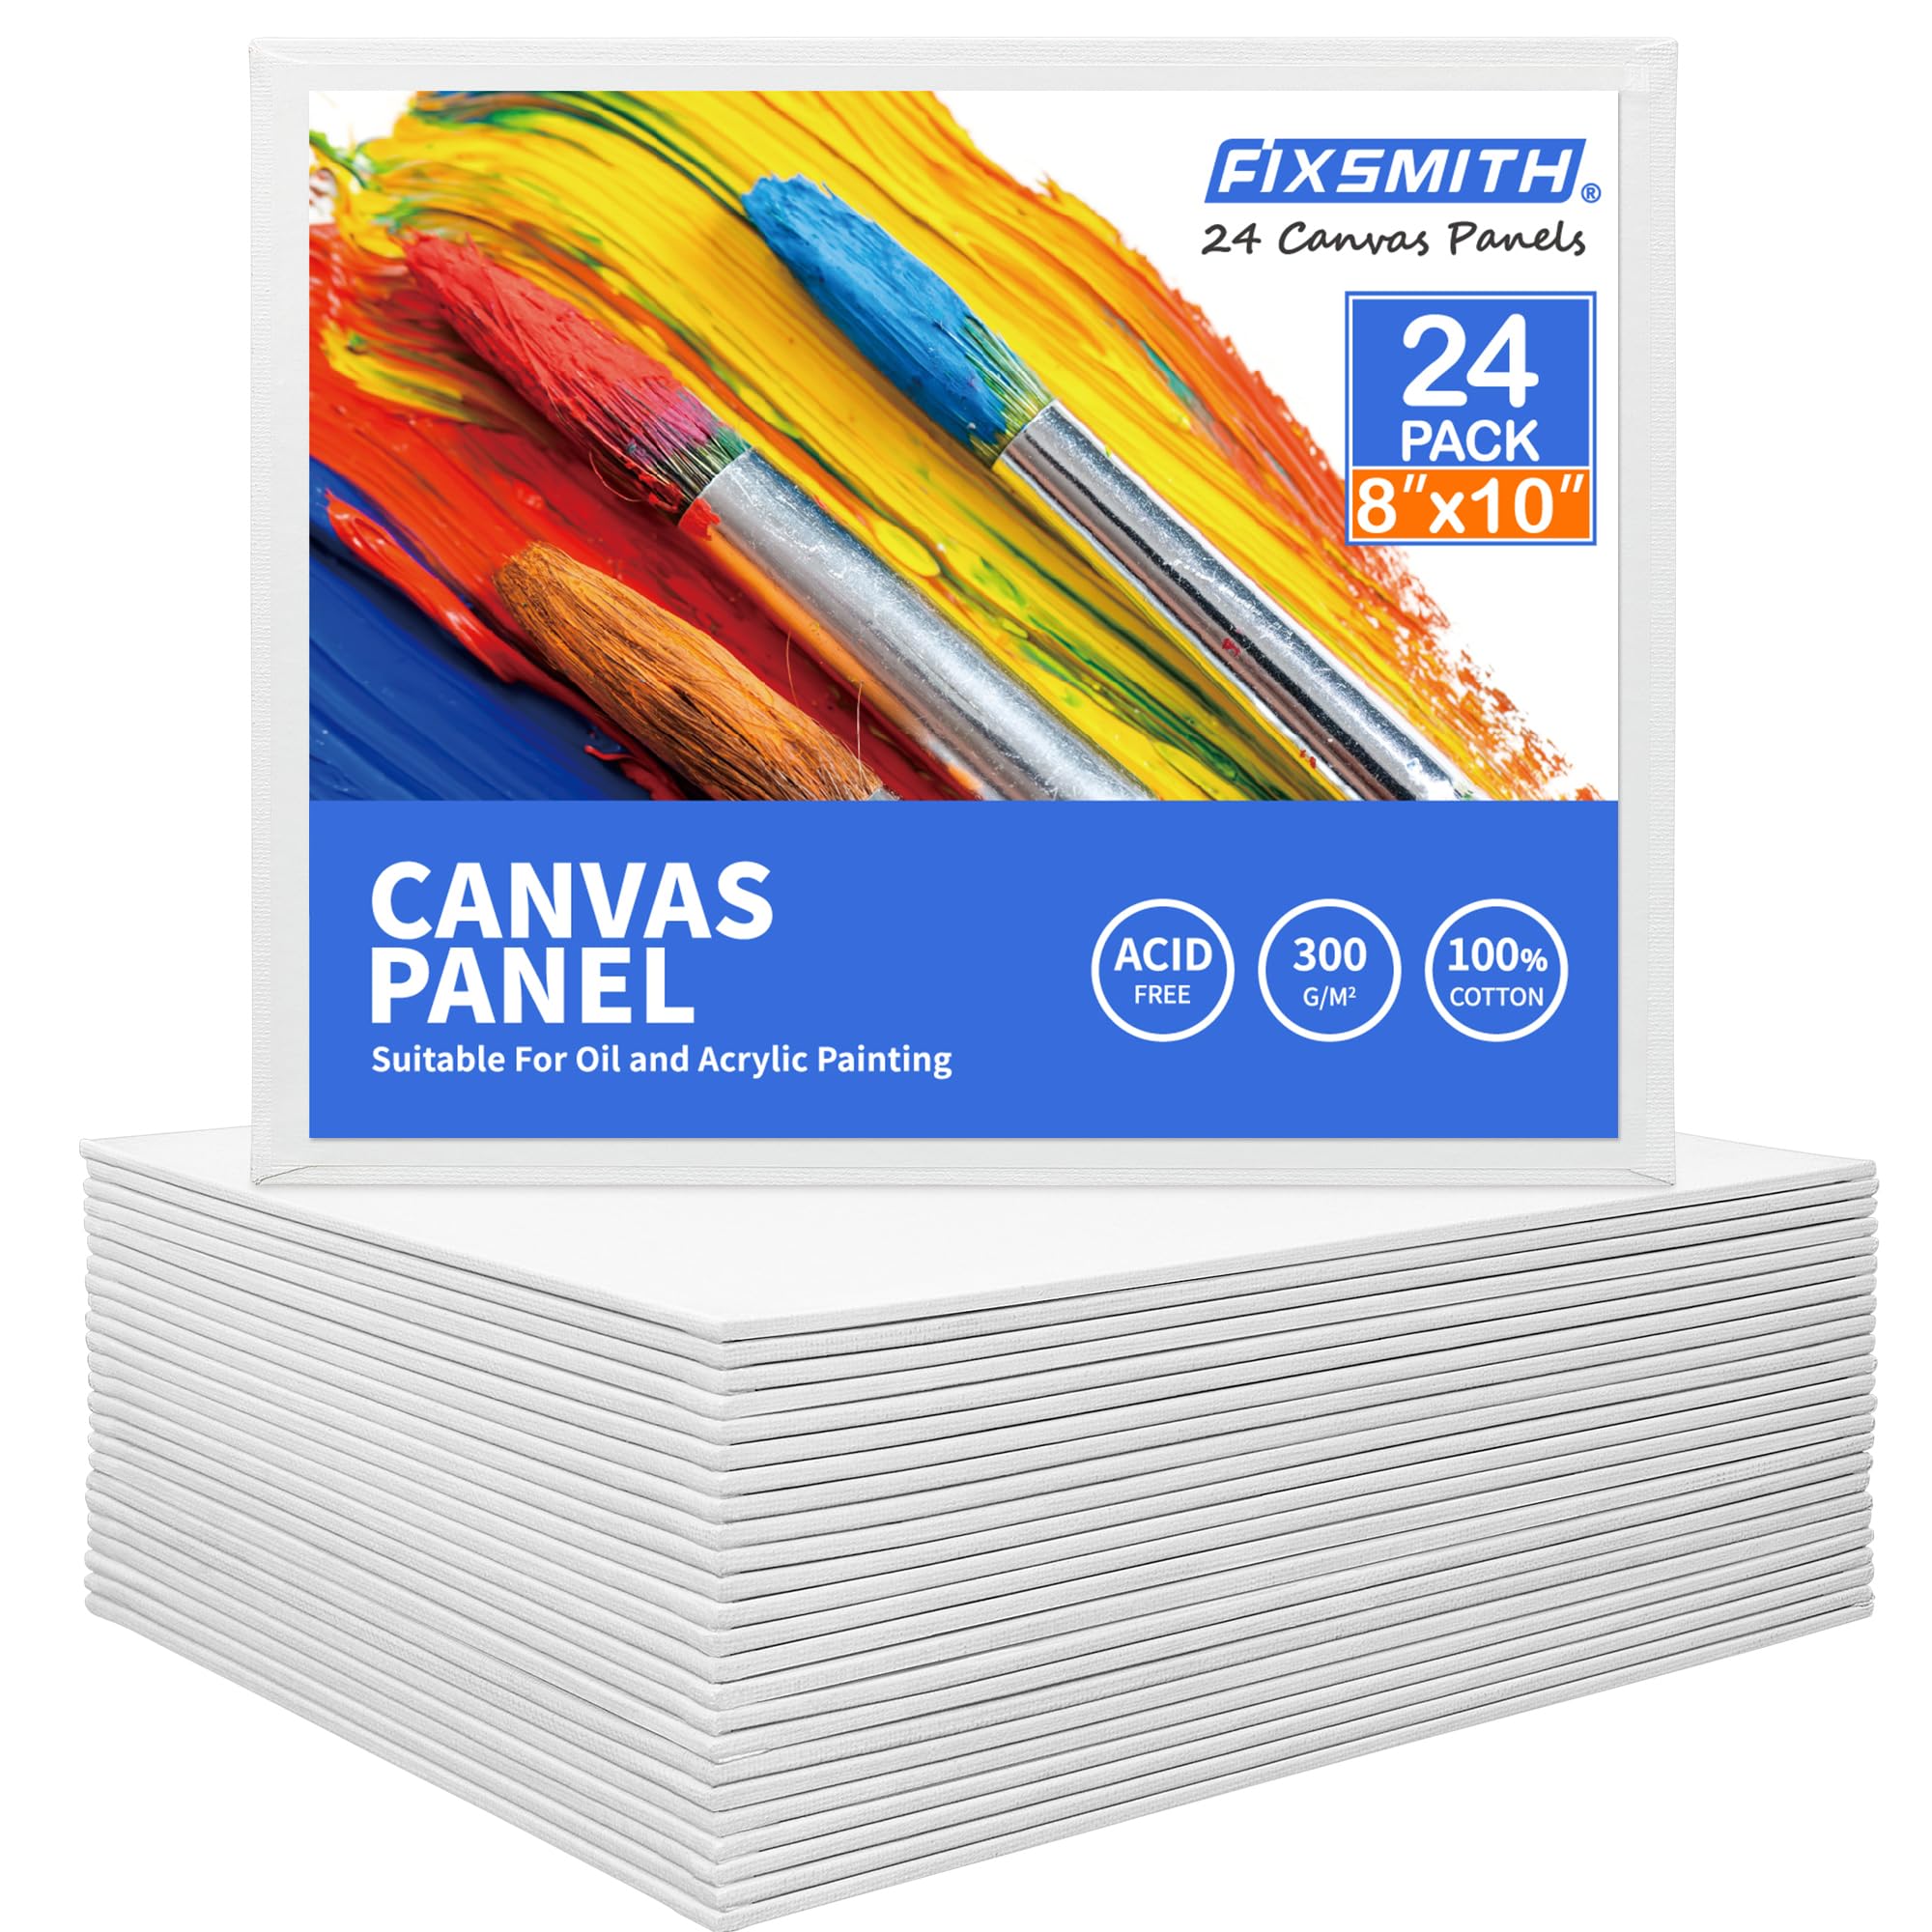 FIXSMITH Canvas Boards for Painting 8x10 Inch, Super Value 24 Pack Paint Canvases, White Blank Canvas Panels, 100% Cotton Primed, Painting Art Supplies